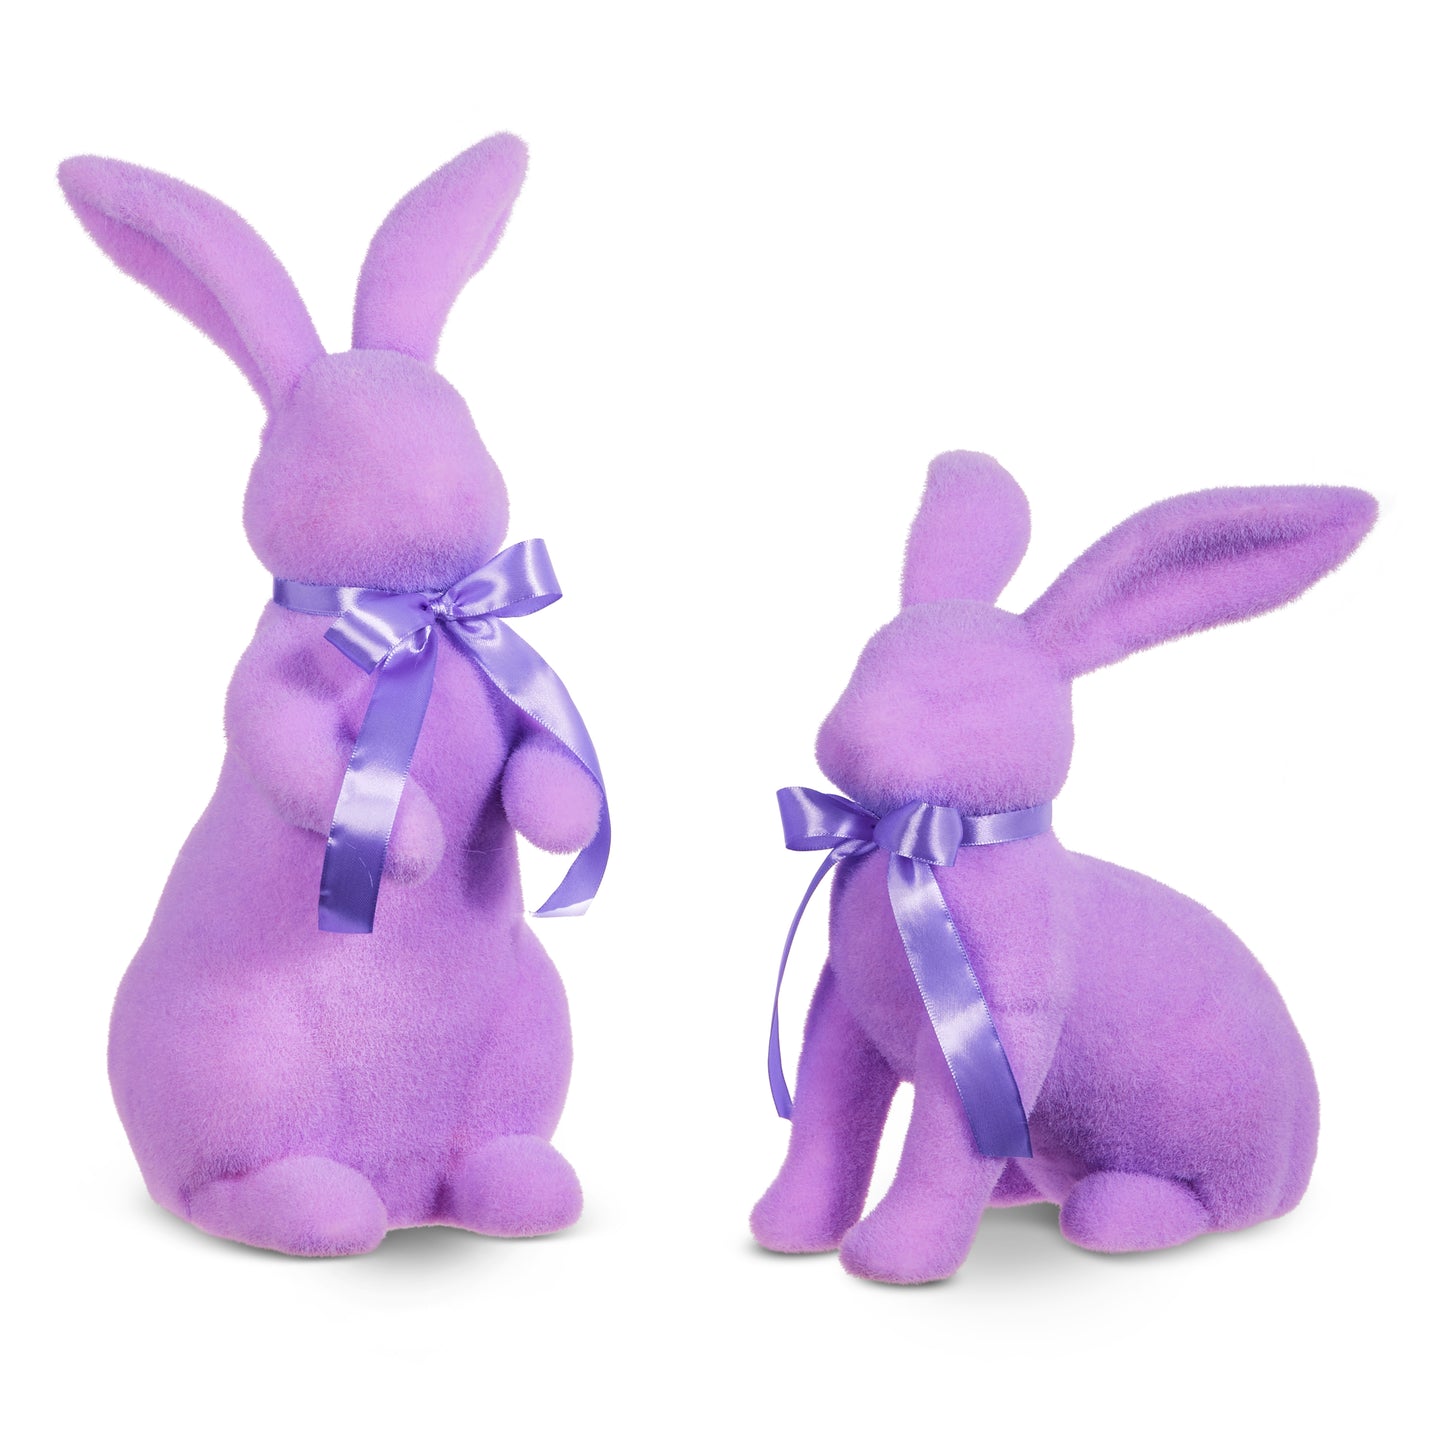 Adorable 16" Flocked Easter Bunnies Set - Perfect for Spring & Easter Home Decor